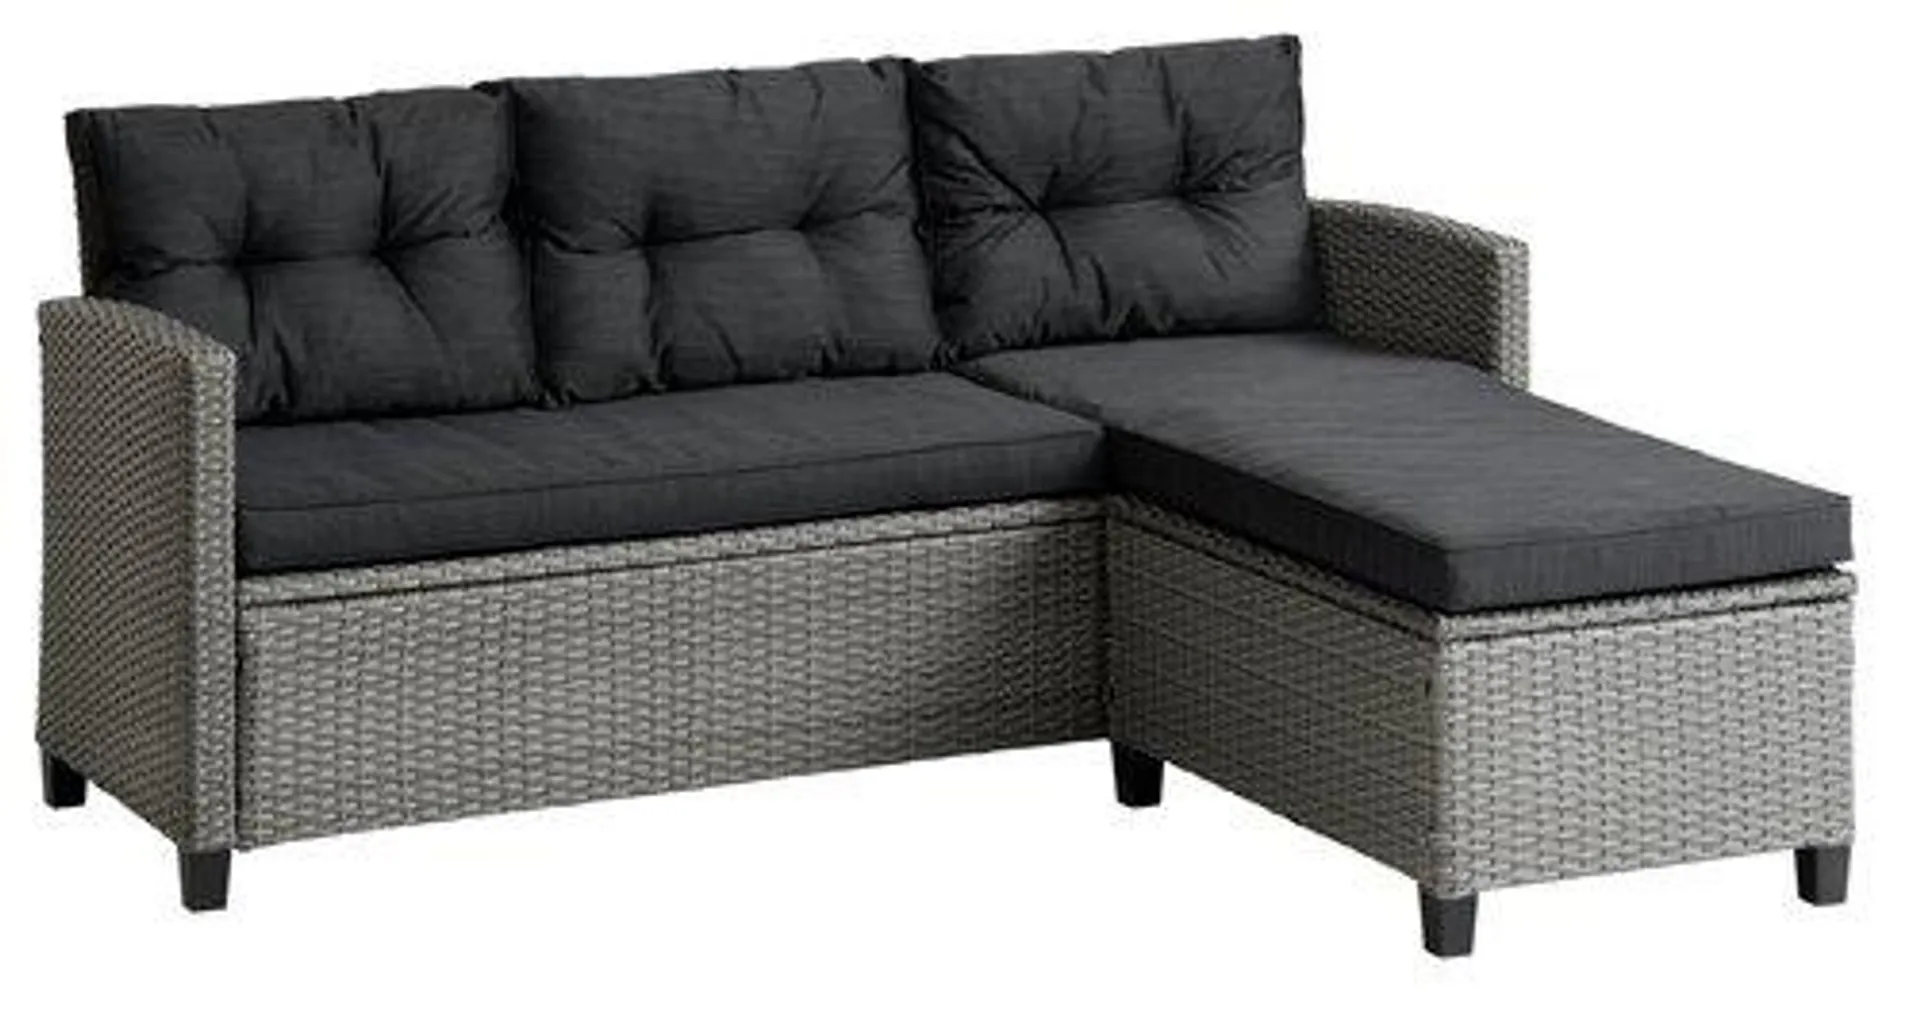 Lounge sofa MORA w/chaise 3 pers. grey